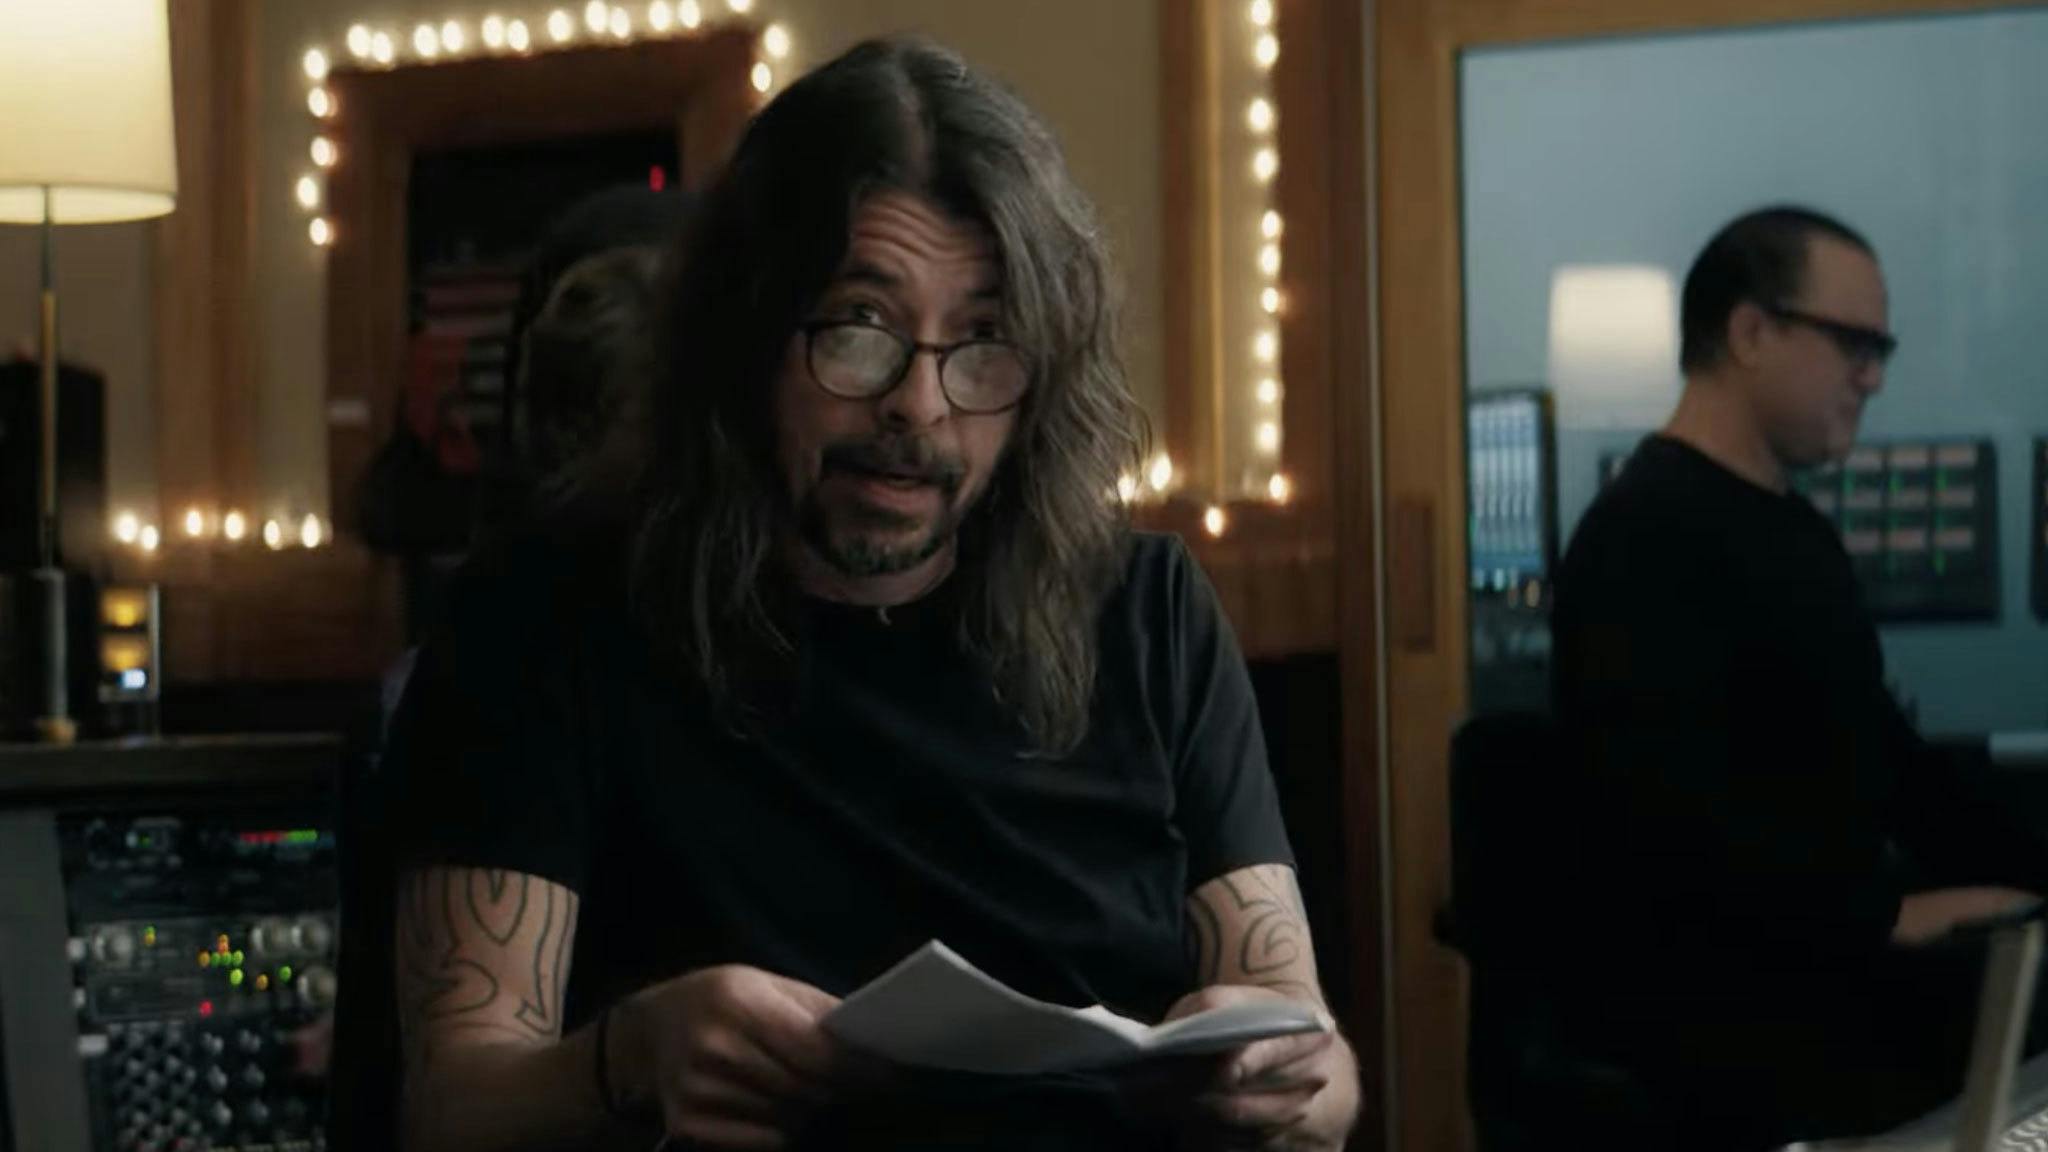 Watch teasers for Dave Grohl’s upcoming Super Bowl commercial